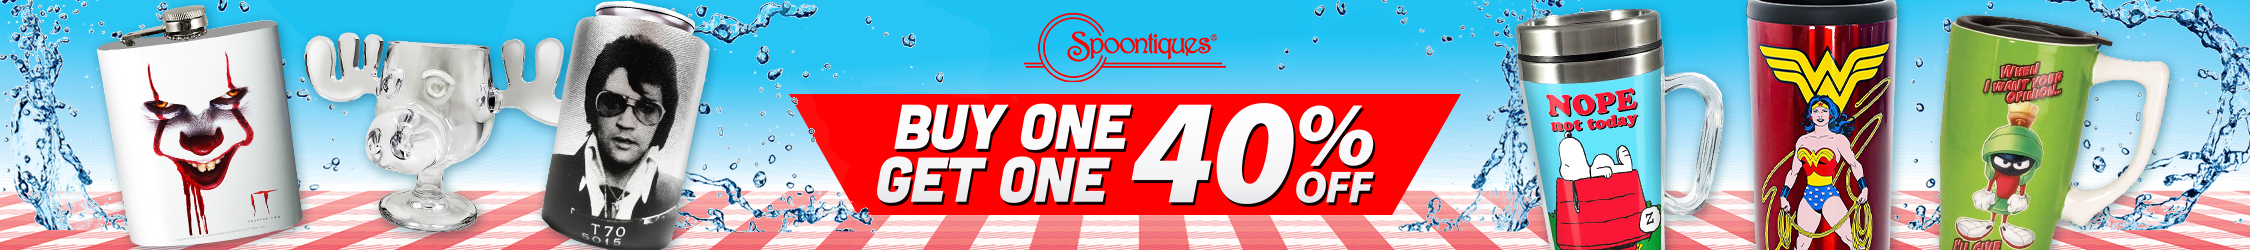 Buy One, Get One 40% Off on Spoontiques